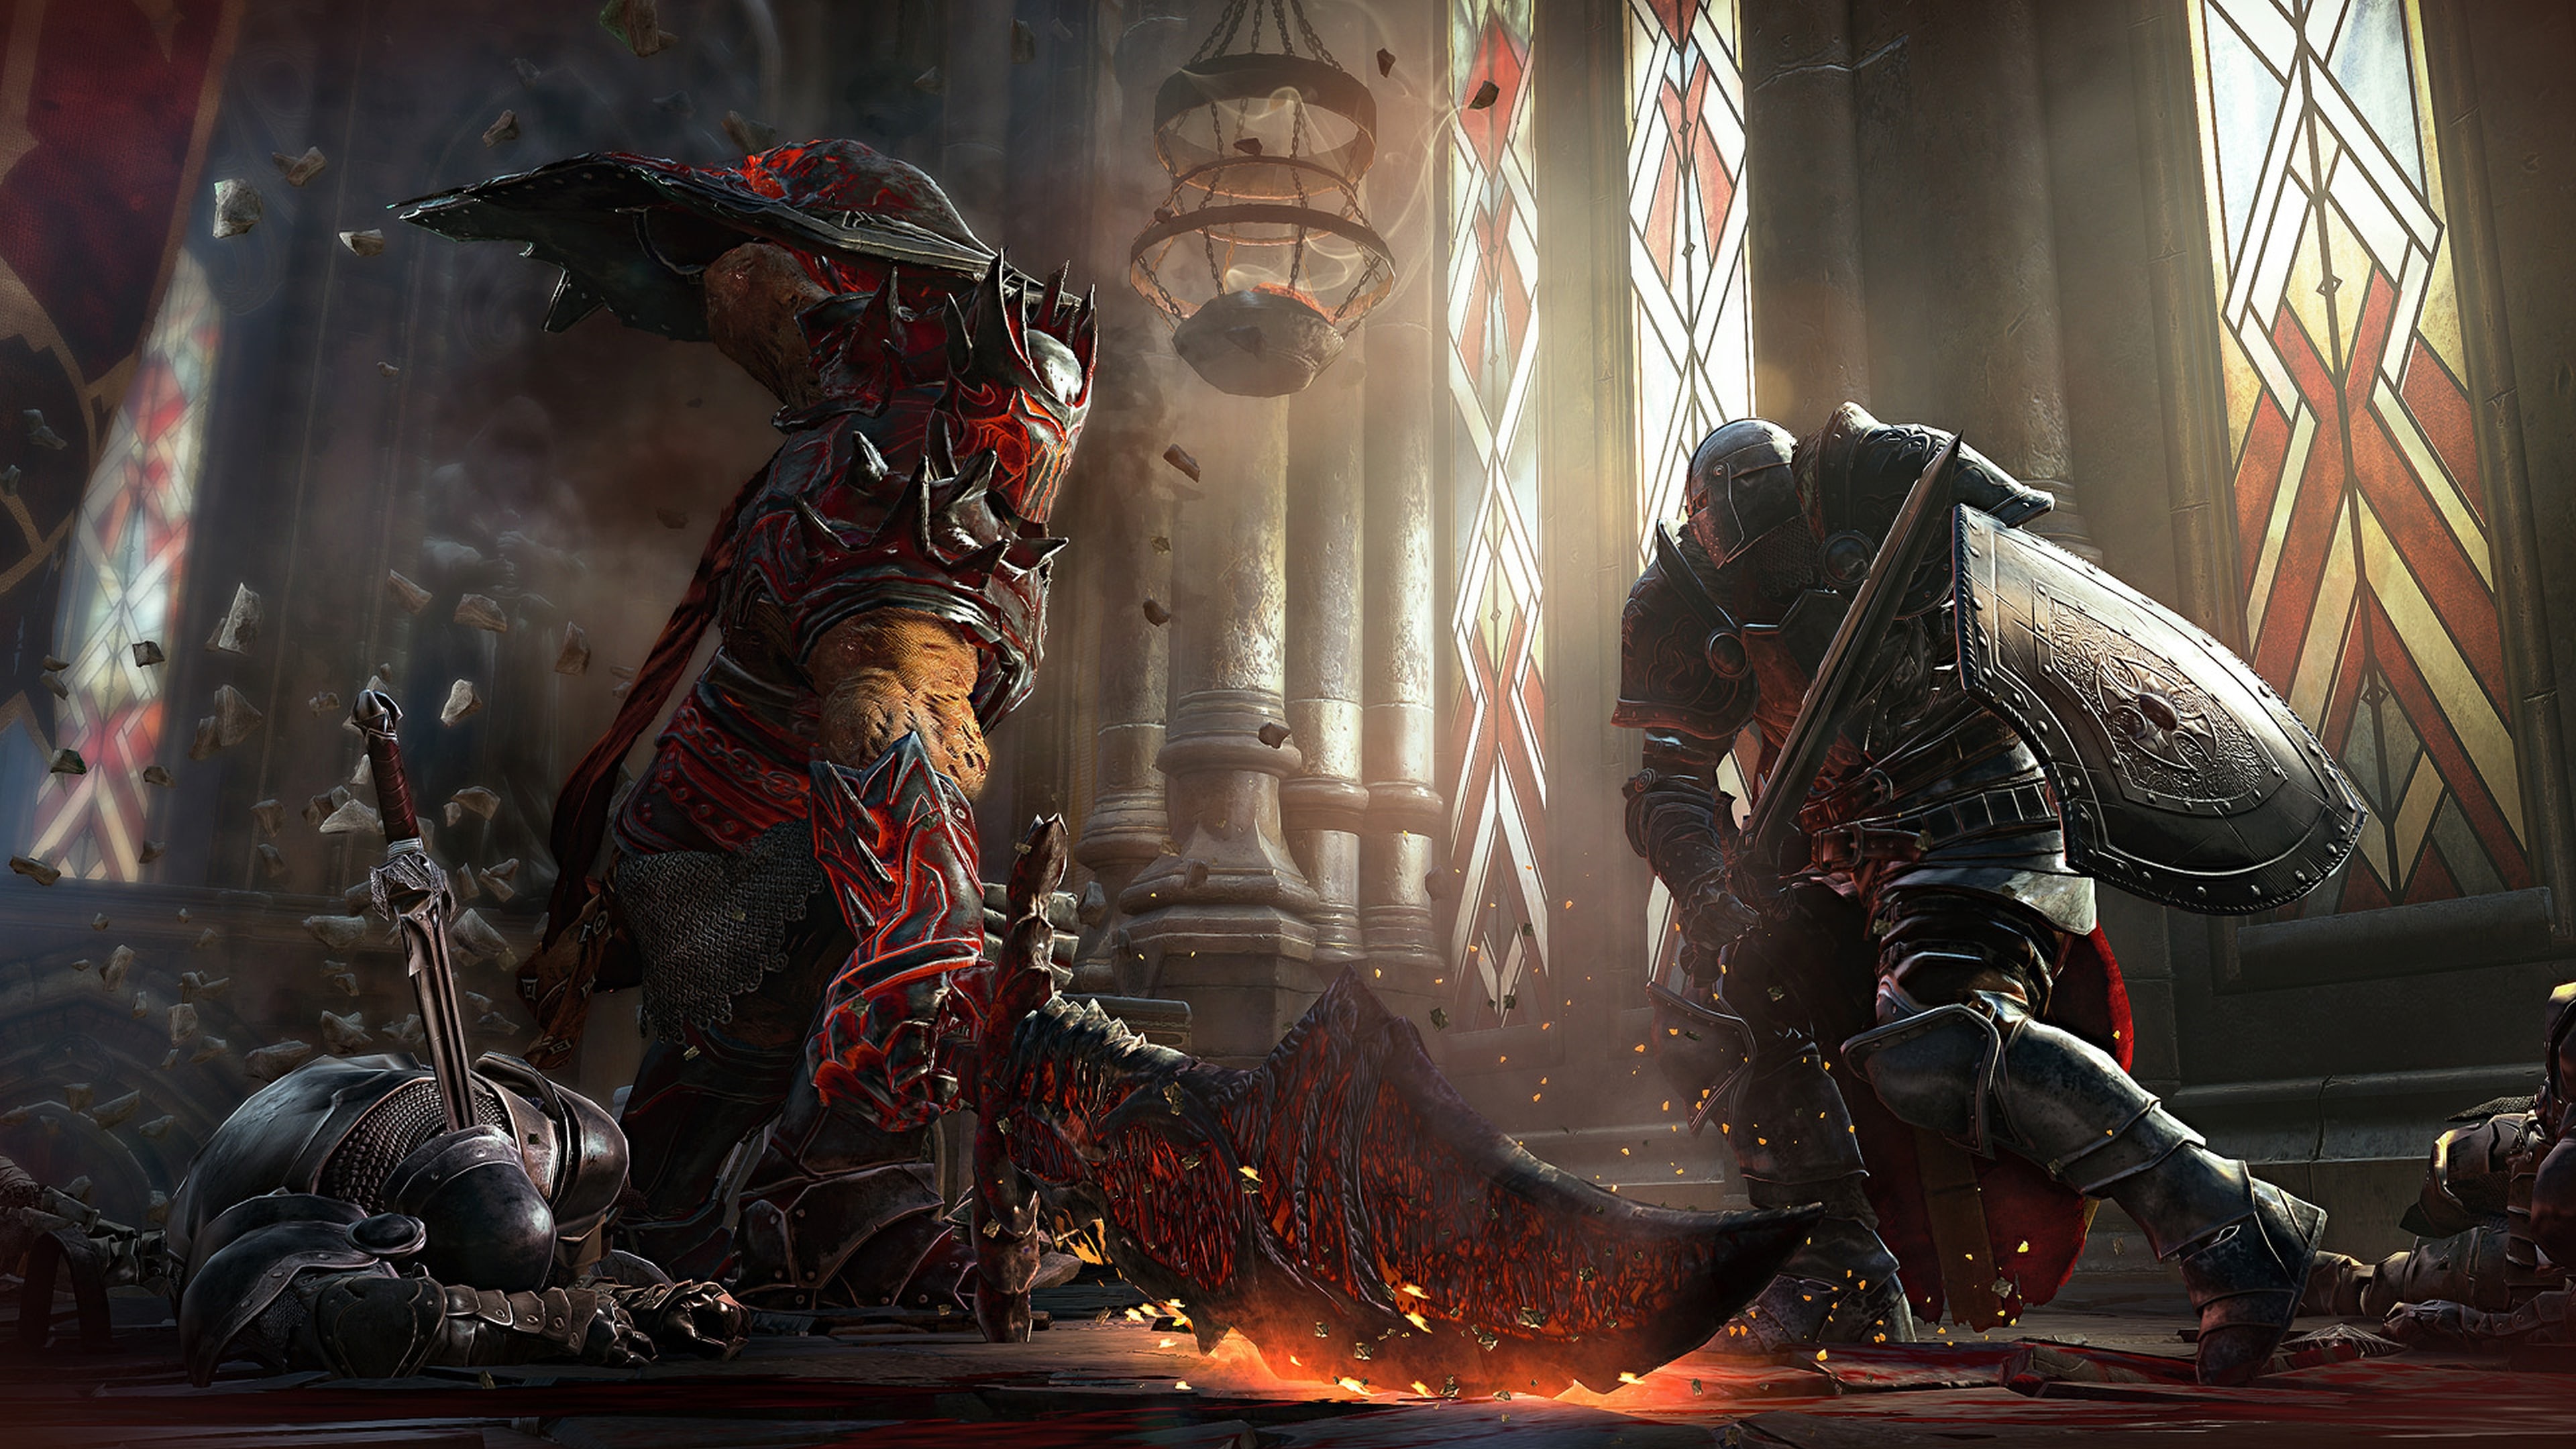 Lords of the Fallen - Ancient Labyrinth DLC Trophy Guide